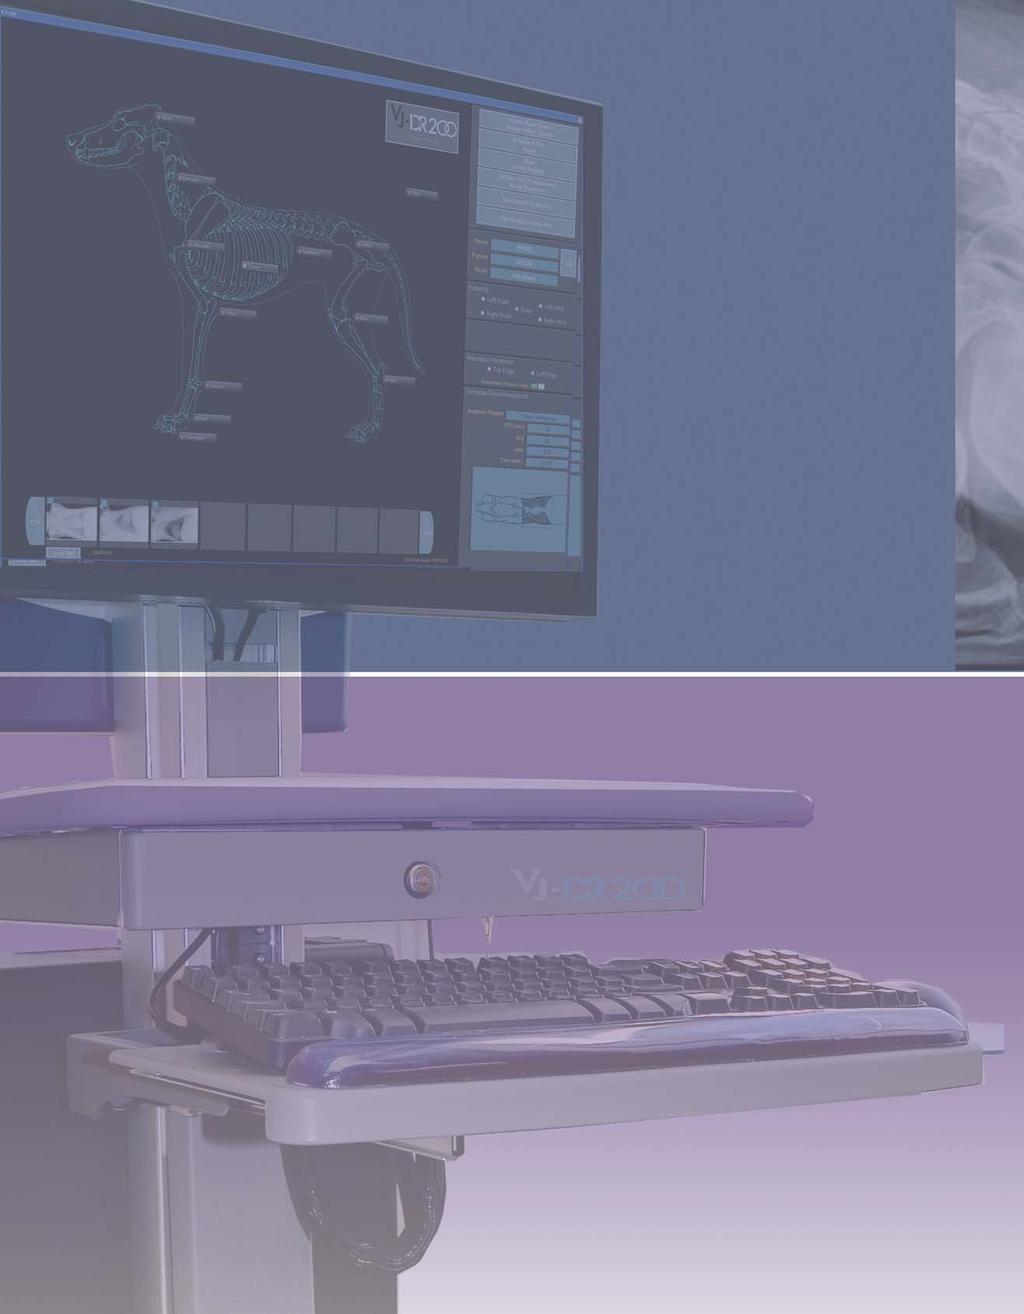 MEDICAL SYSTEMS Direct Radiography Acquisition Systems VJ Medical Systems offers digital veterinary x-ray soluions that combine advanced image processing,